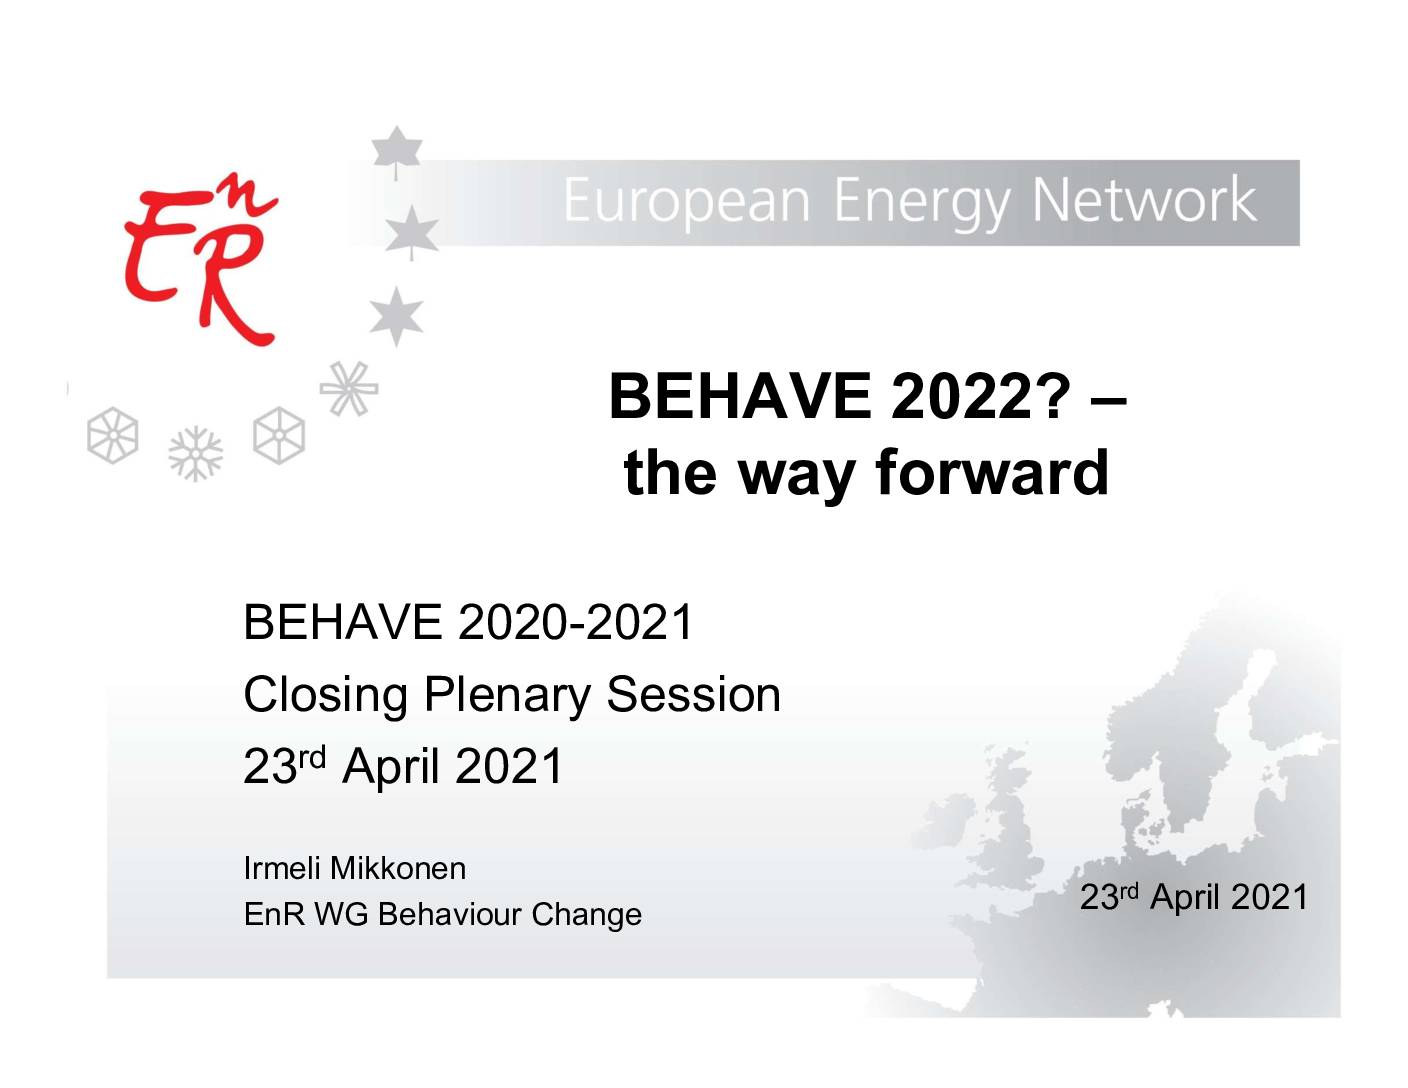 BEHAVE – The way forward